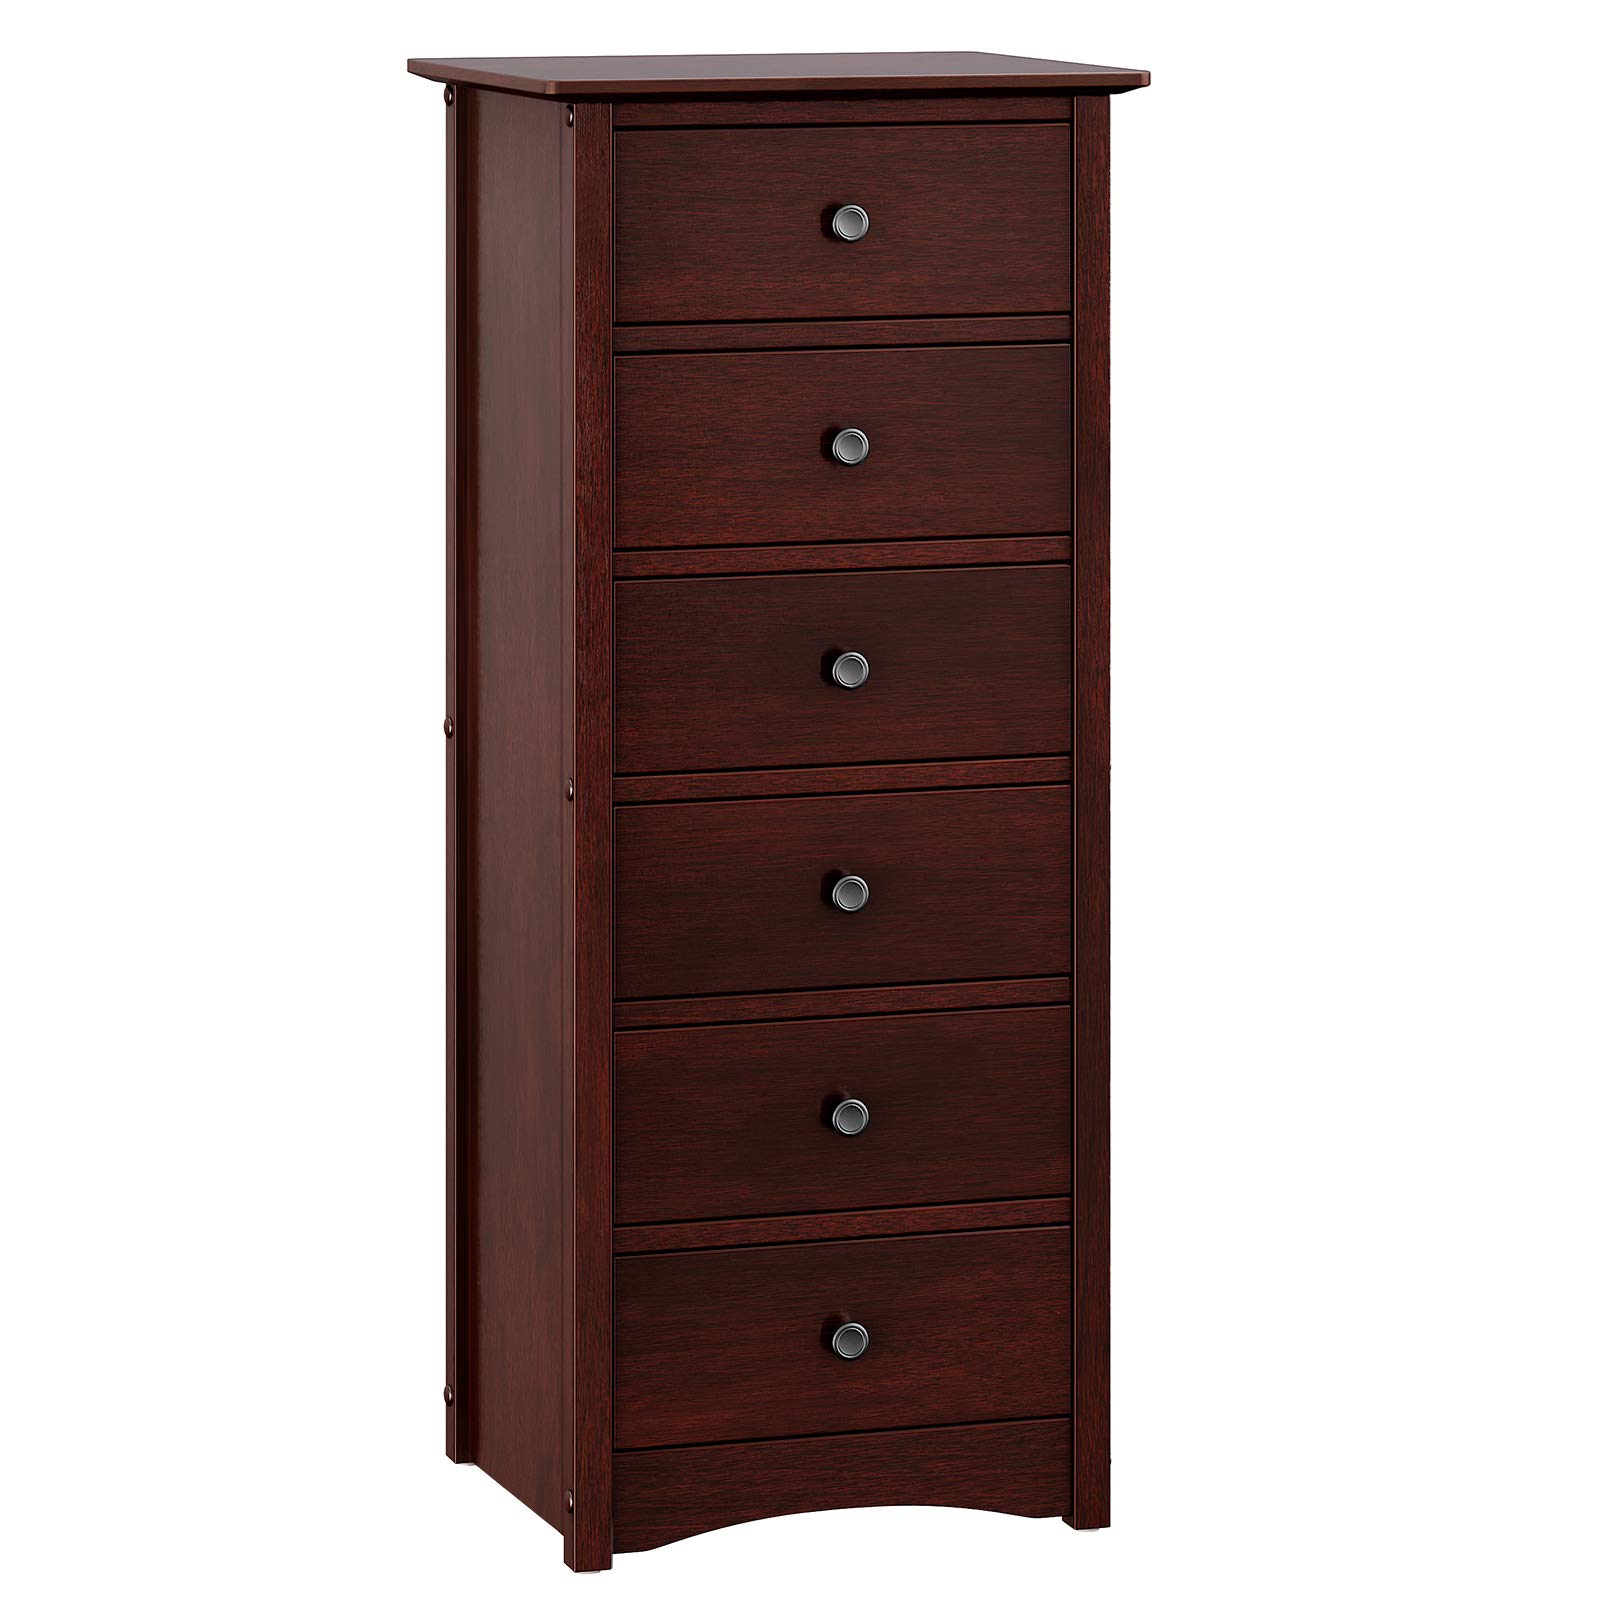 VASAGLE Narrow Chest of Drawers, Classic Tall Dresser